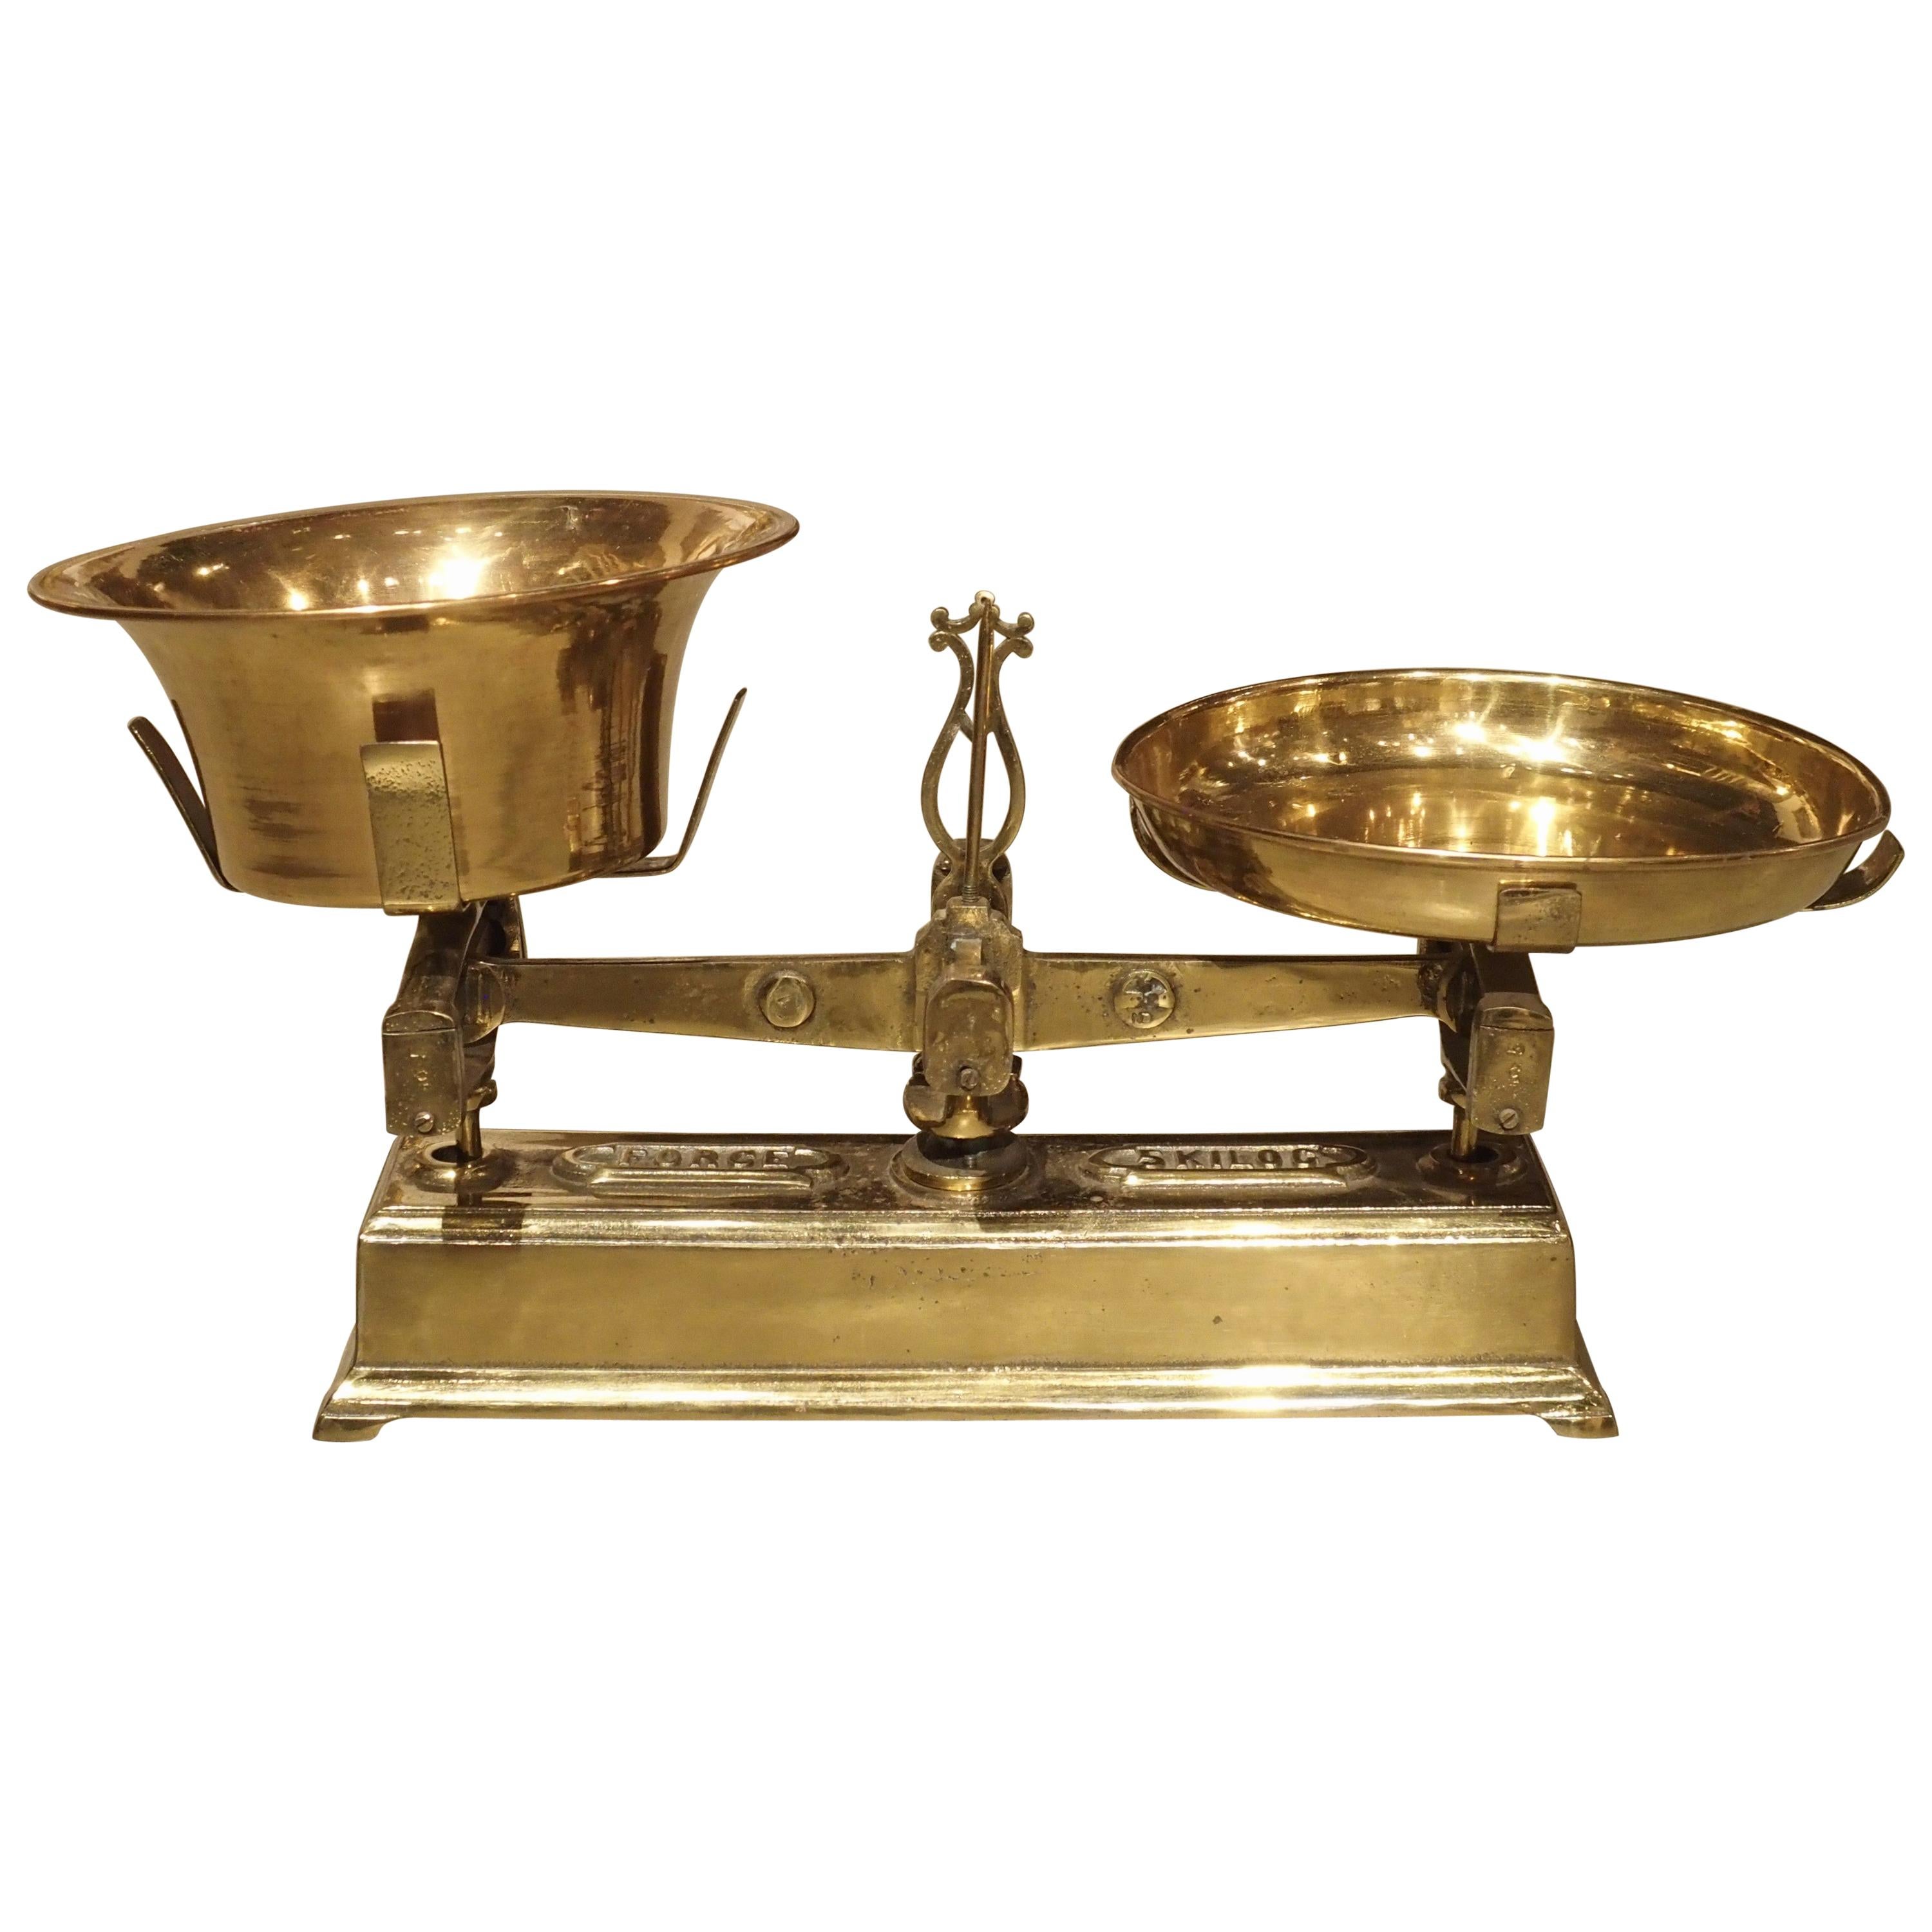 19th Century 5 Kilogram Iron and Brass Scale from France